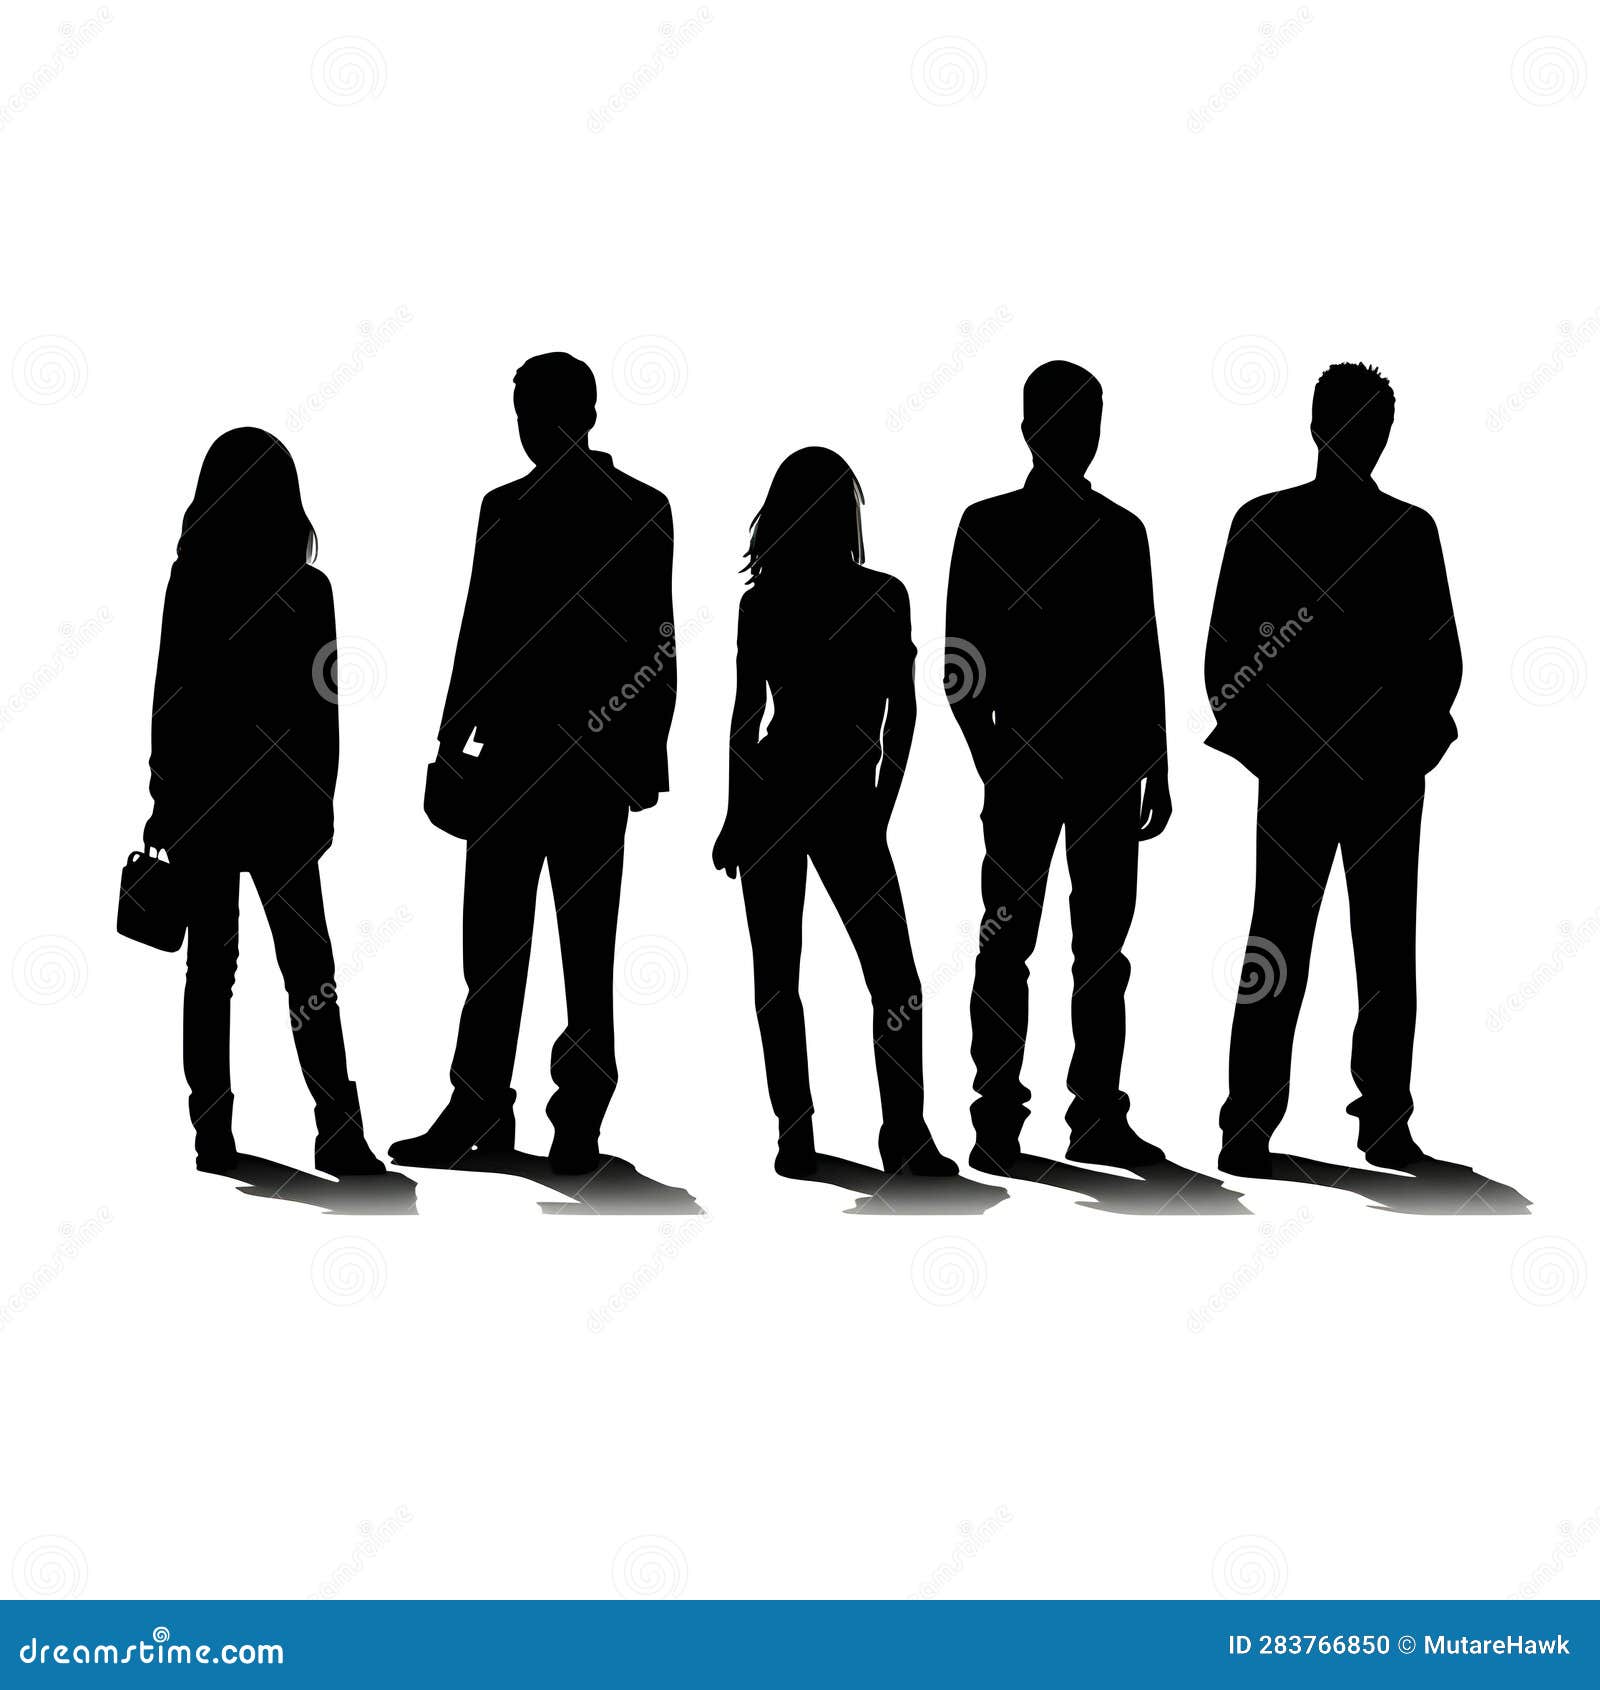 Black Silhouette of Five People Standing on White Background Stock ...